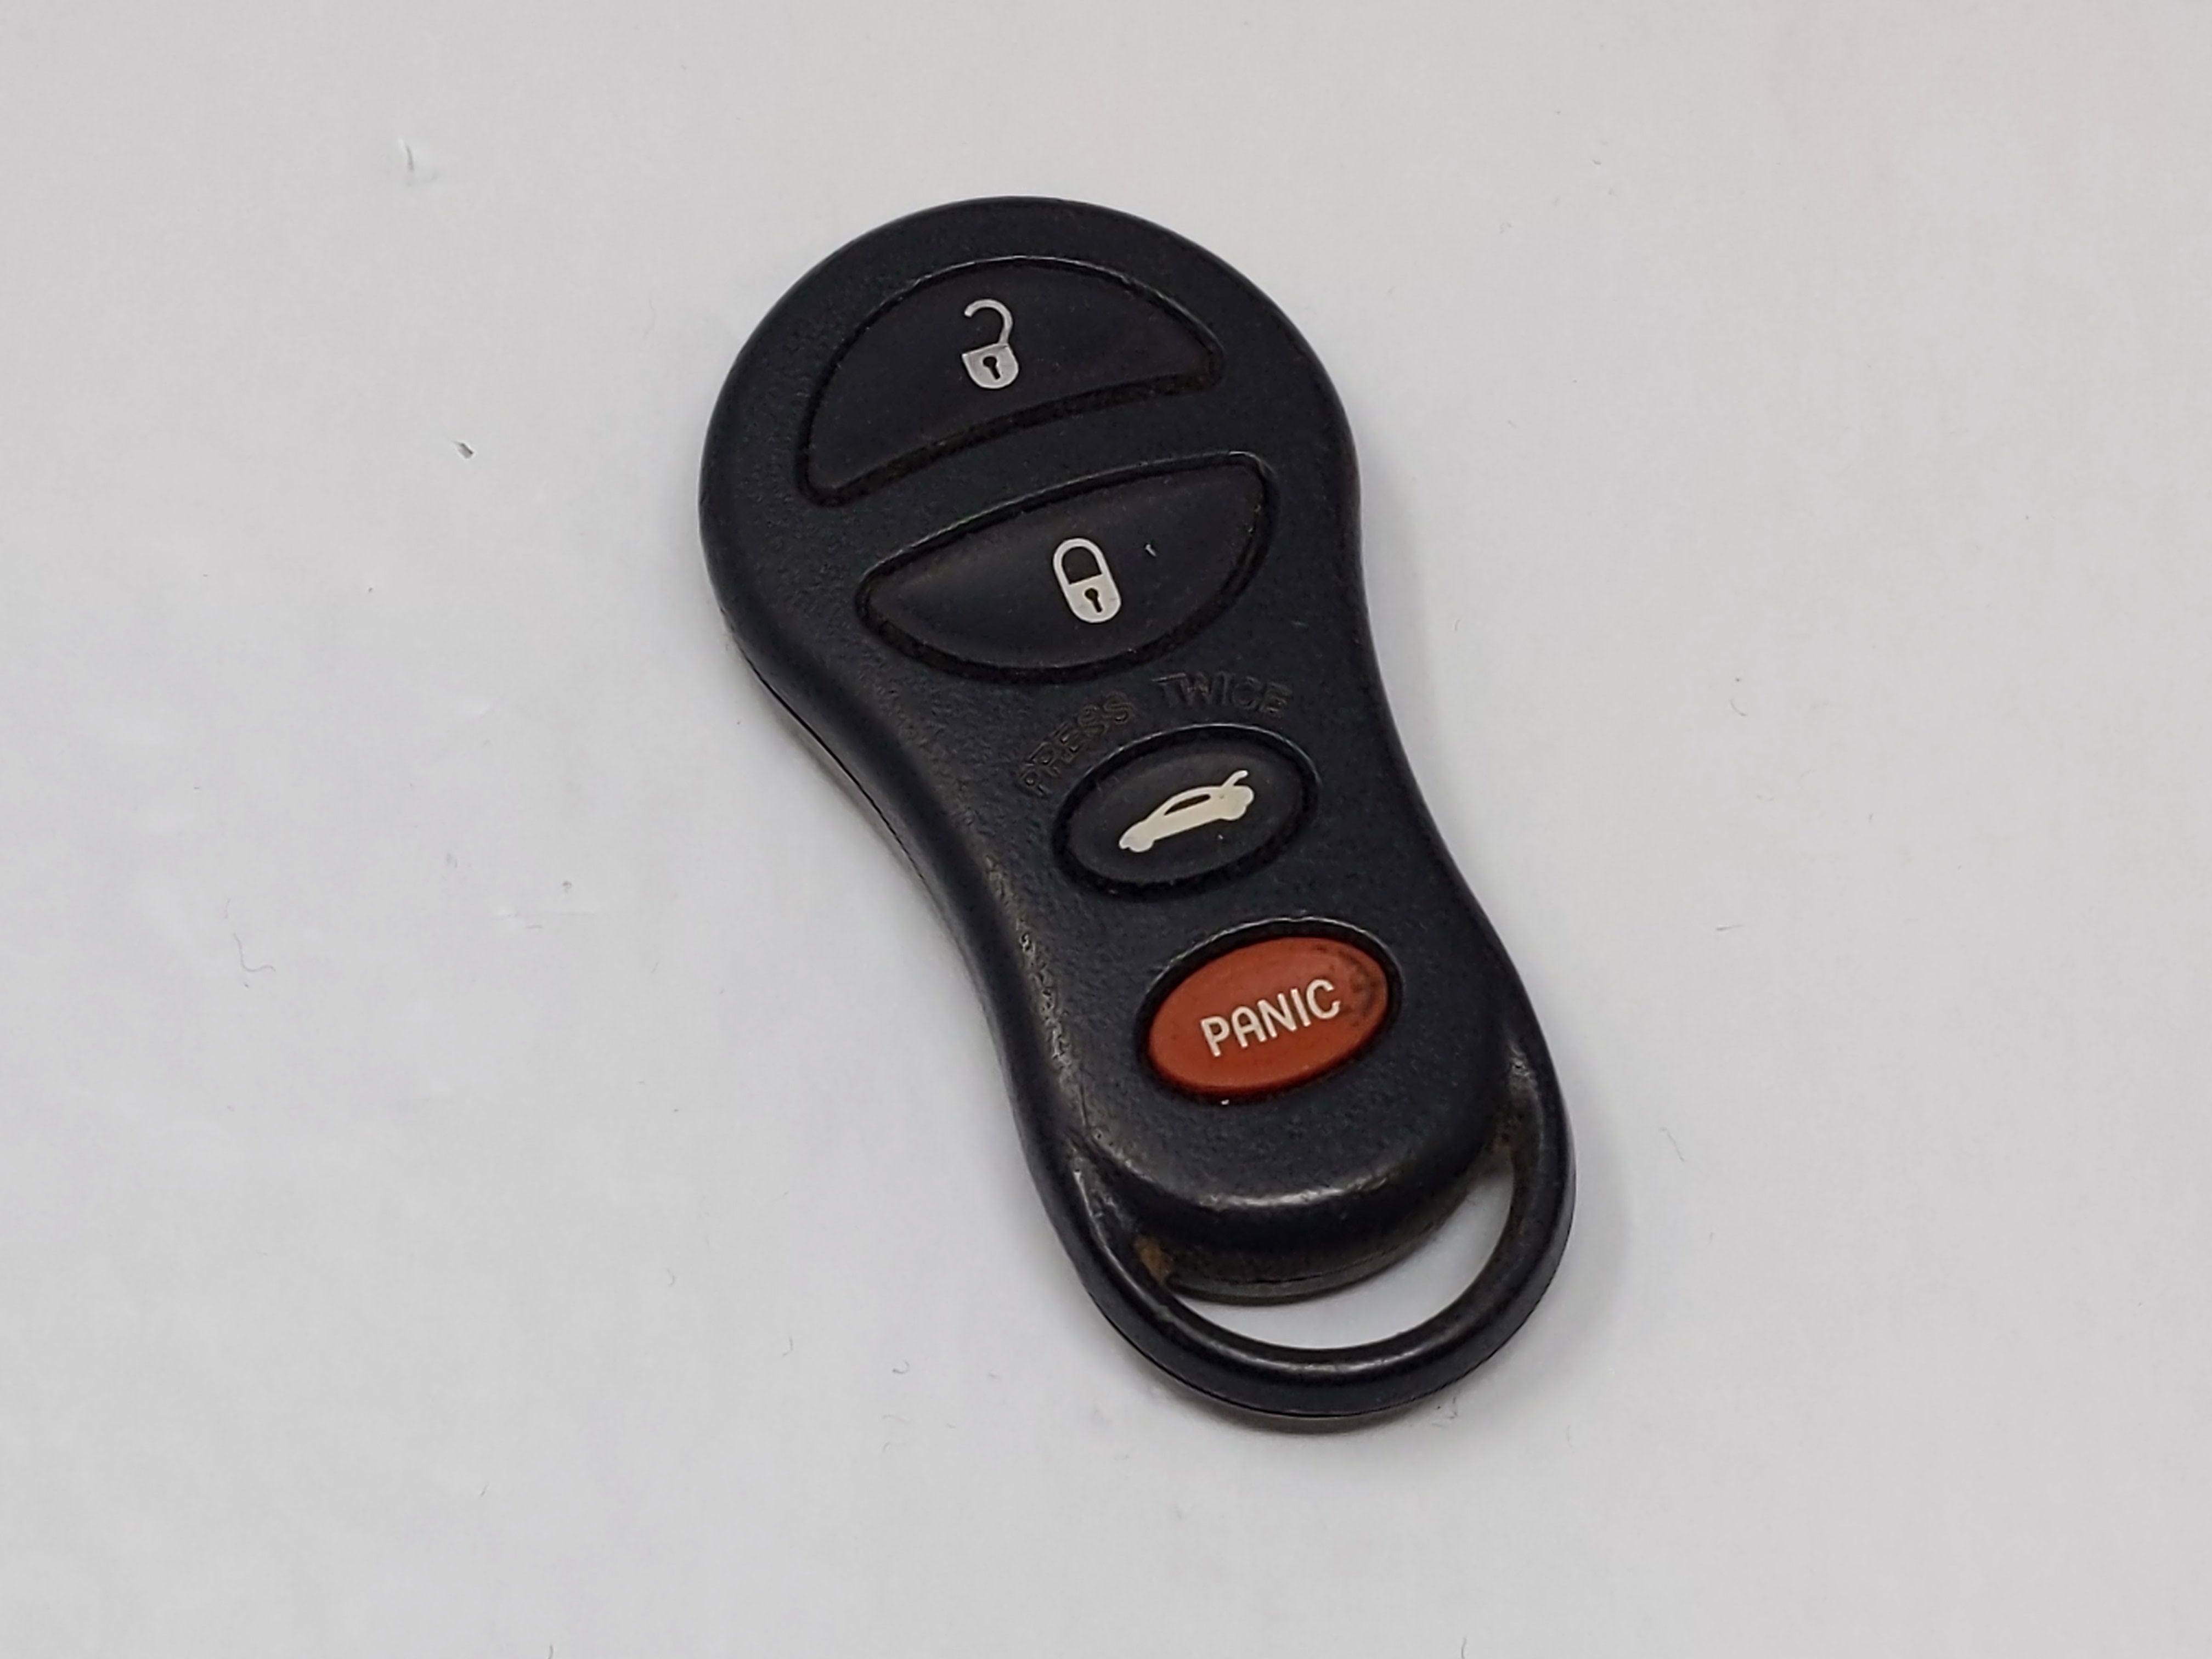 Chrysler Neon Keyless Entry Remote Fob Gq43vt9t 04759008af 4 Buttons - Oemusedautoparts1.com